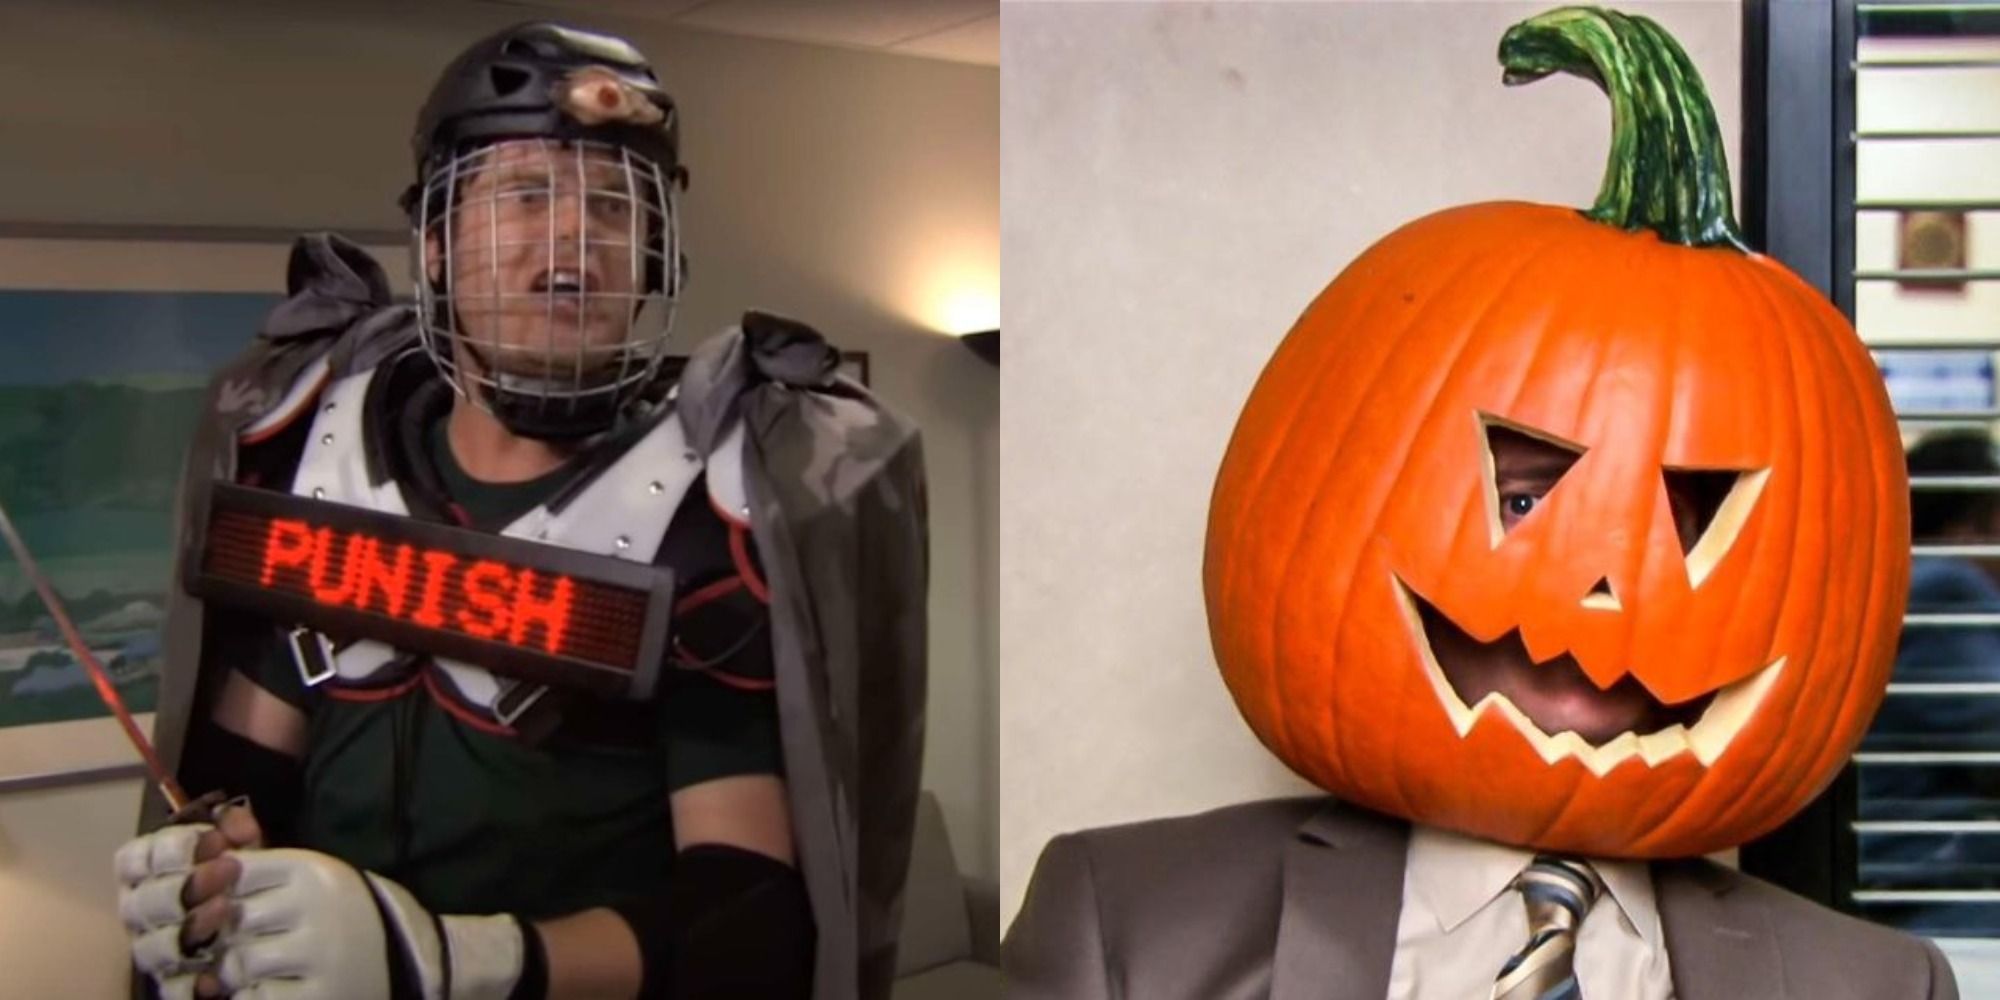 An image of Dwight dressed as Recyclops and with a pumpkin on his head in The Office